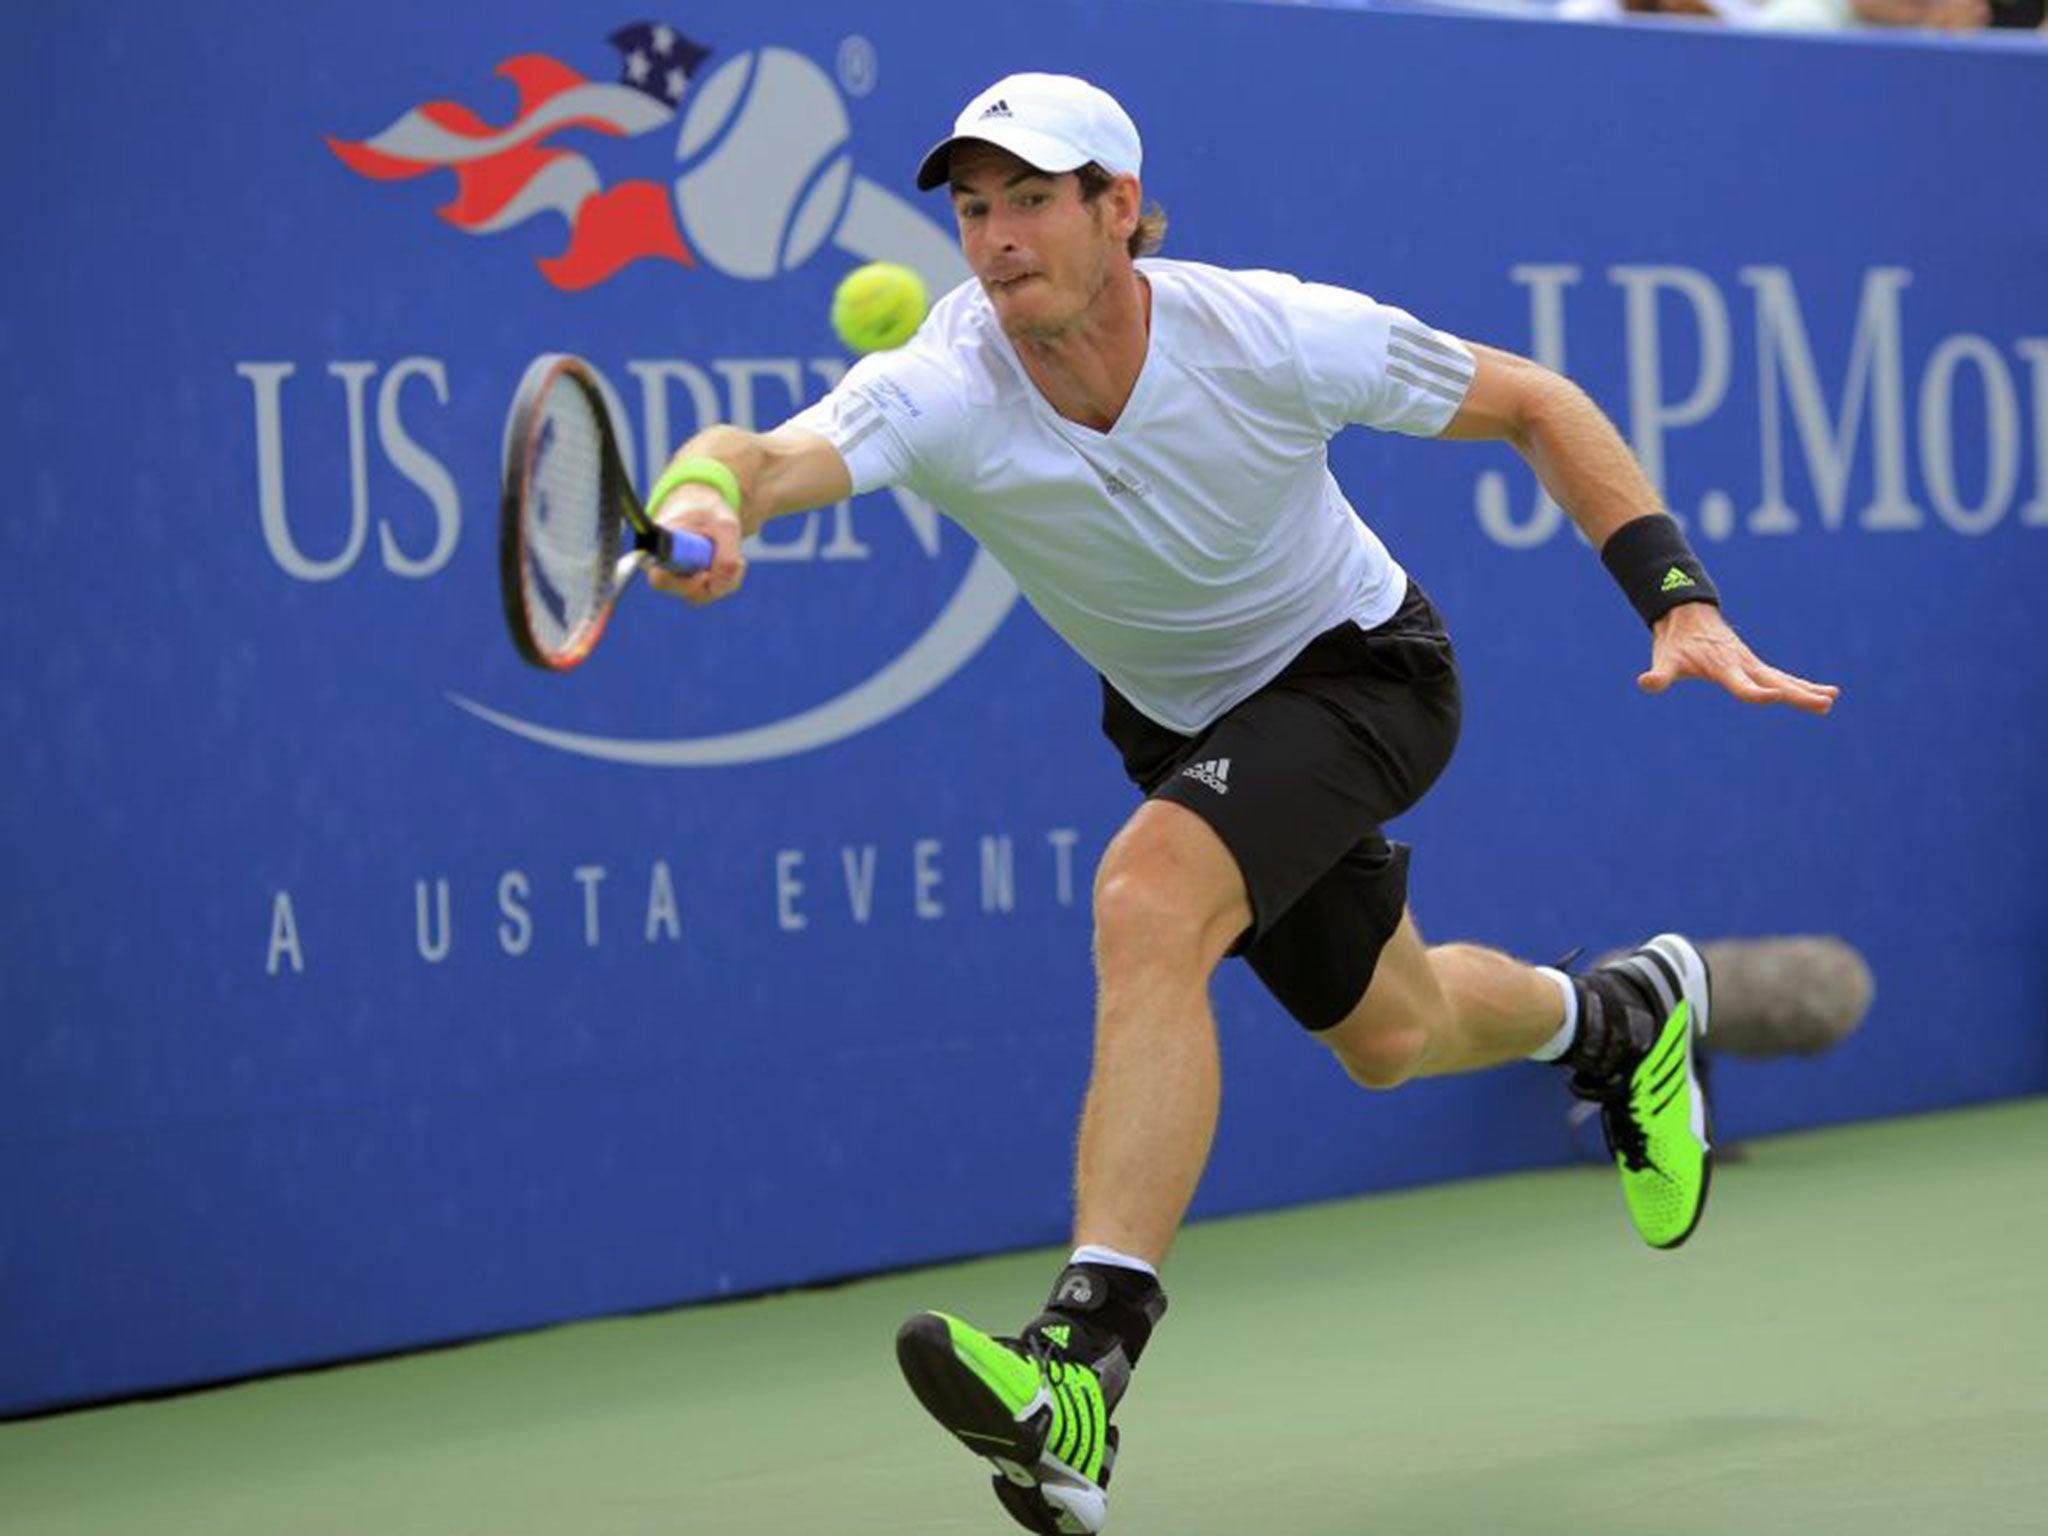 Andy Murray hits a return during his win over Andrey Kuznetsov